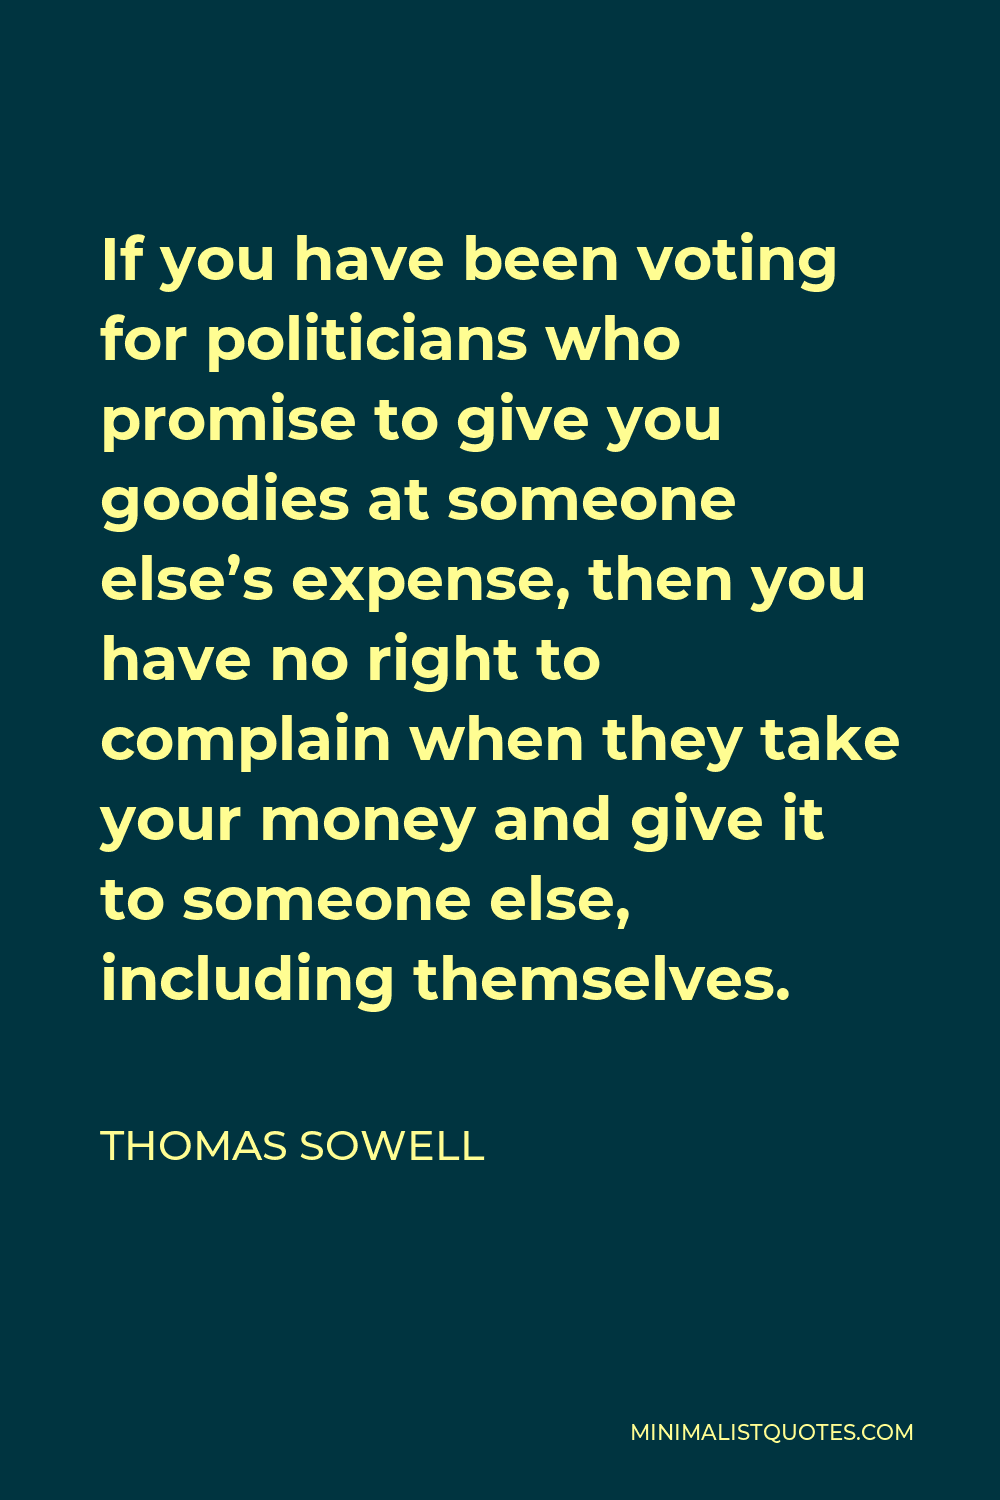 Thomas Sowell Quote - If you have been voting for politicians who promise to give you goodies at someone else’s expense, then you have no right to complain when they take your money and give it to someone else, including themselves.